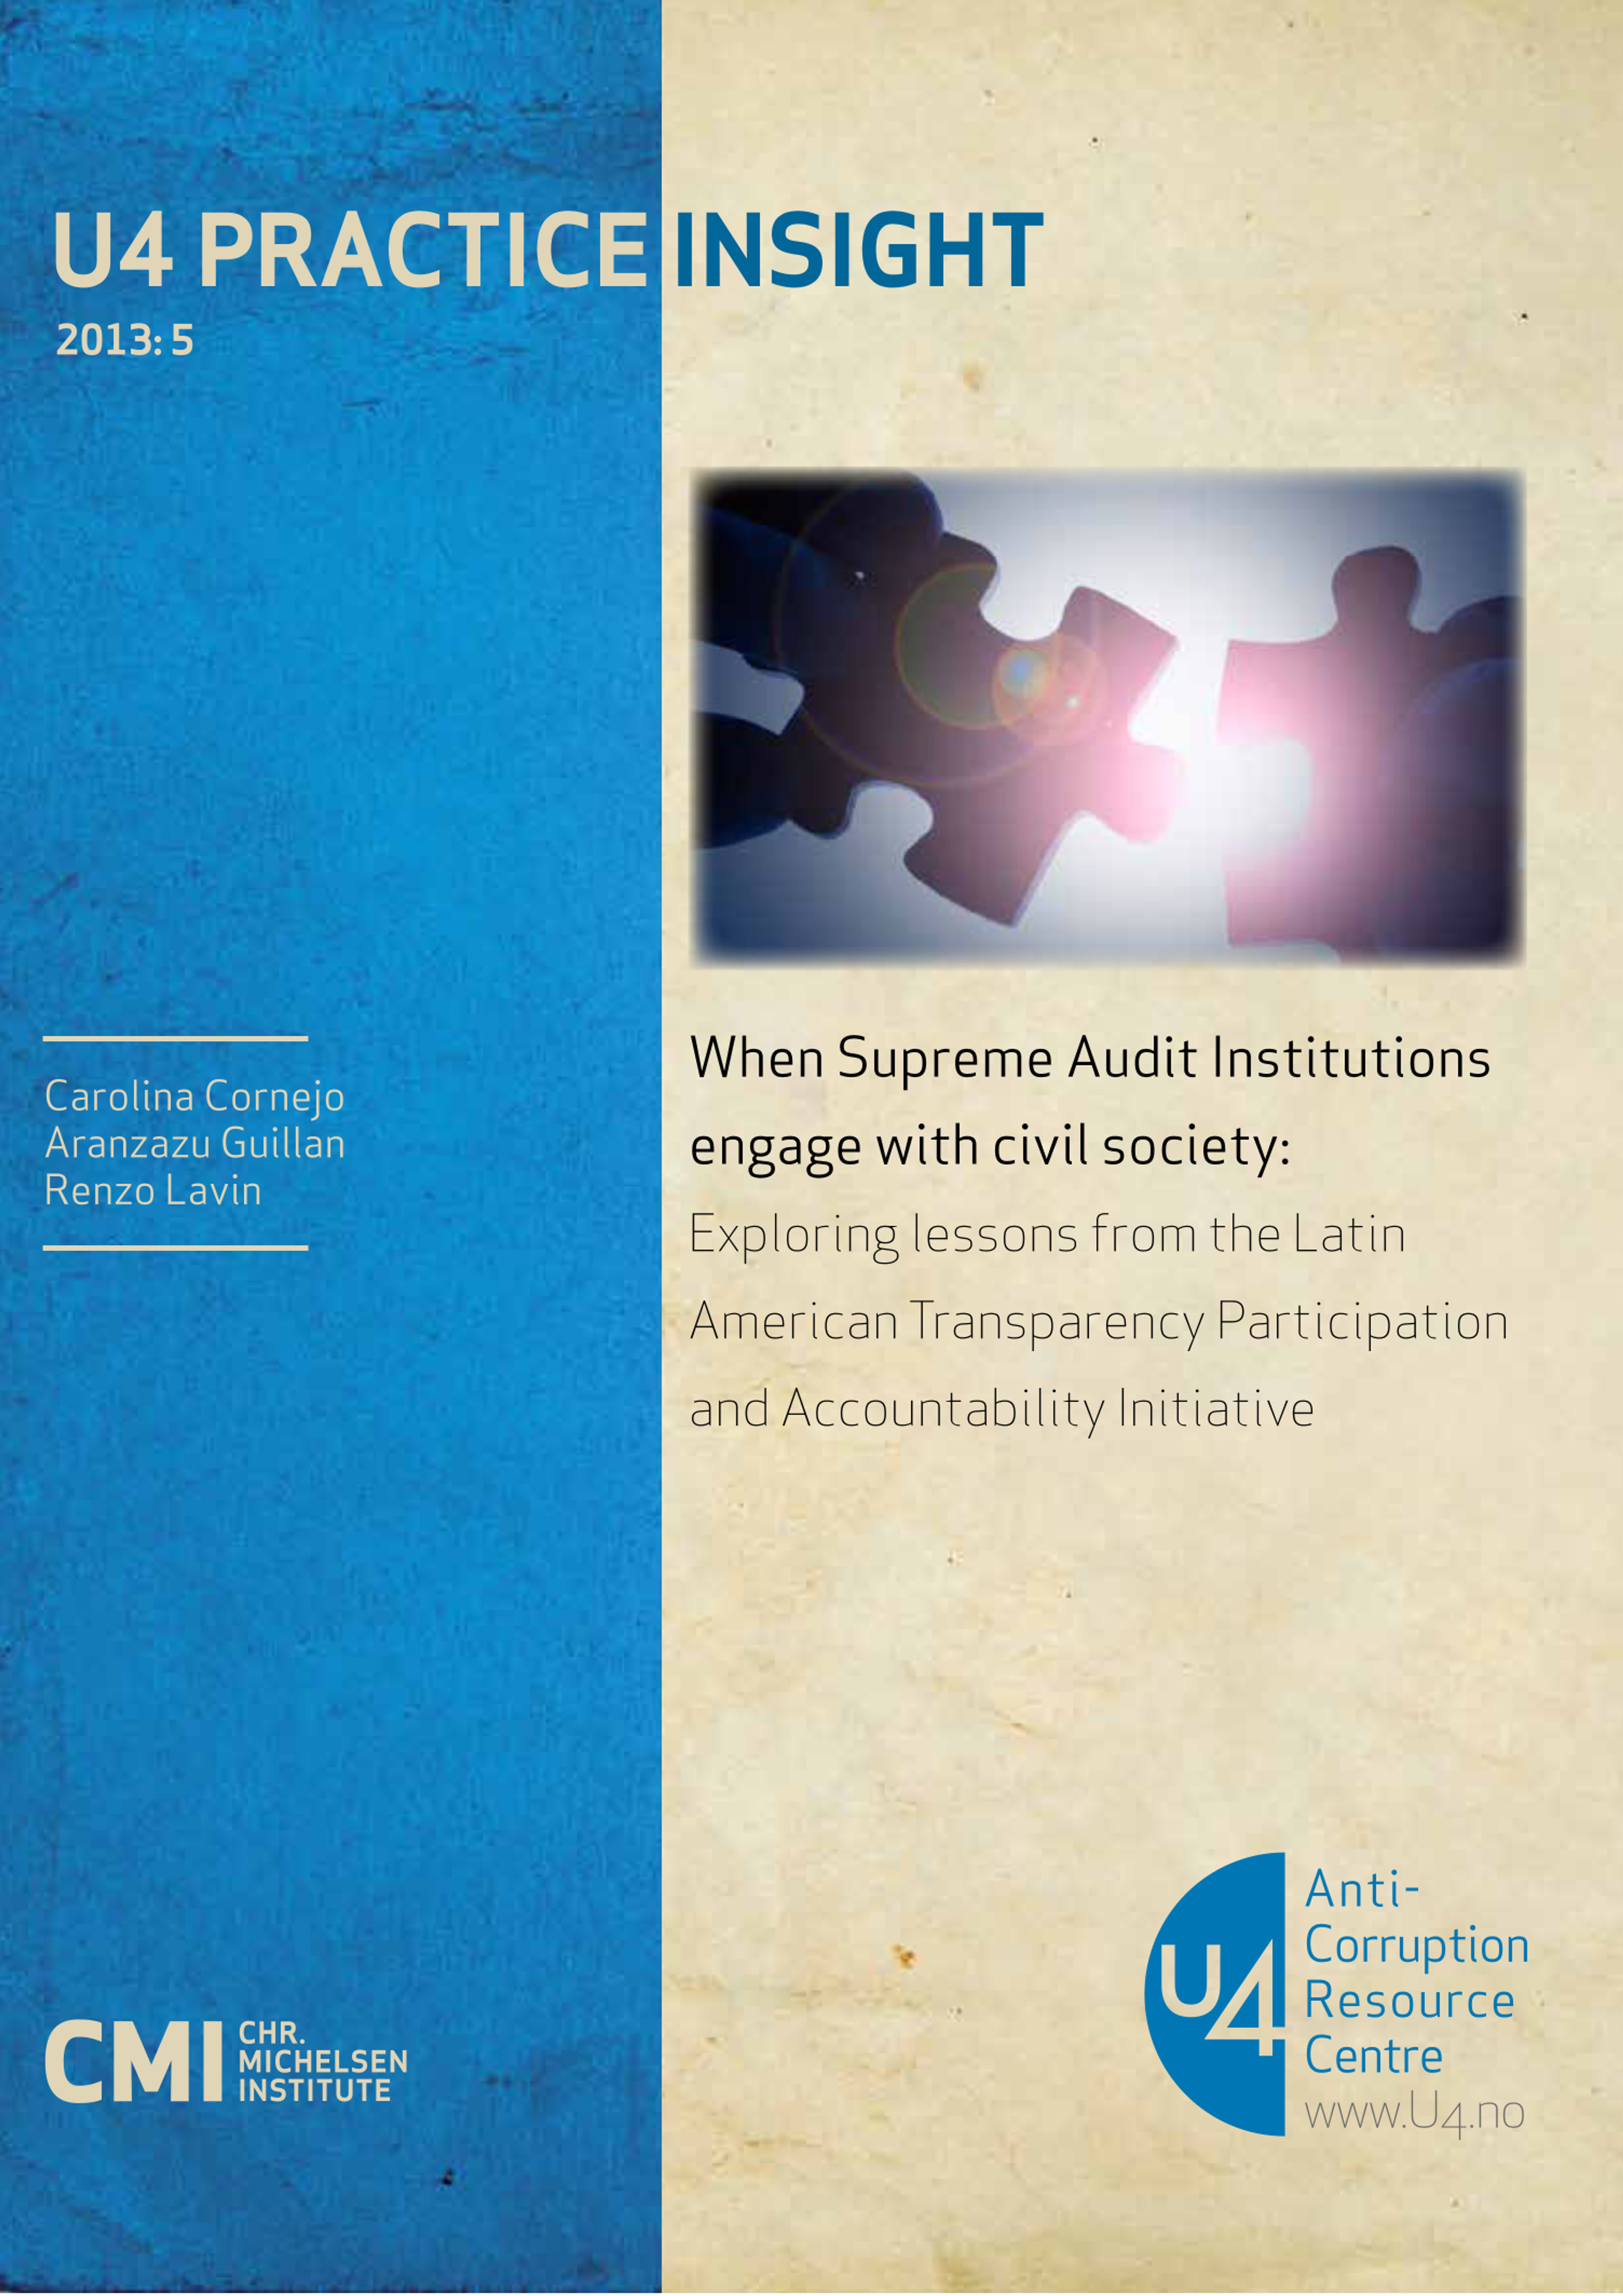 When Supreme Audit Institutions engage with civil society:  Exploring lessons from the Latin American Transparency Participation and Accountability Initiative